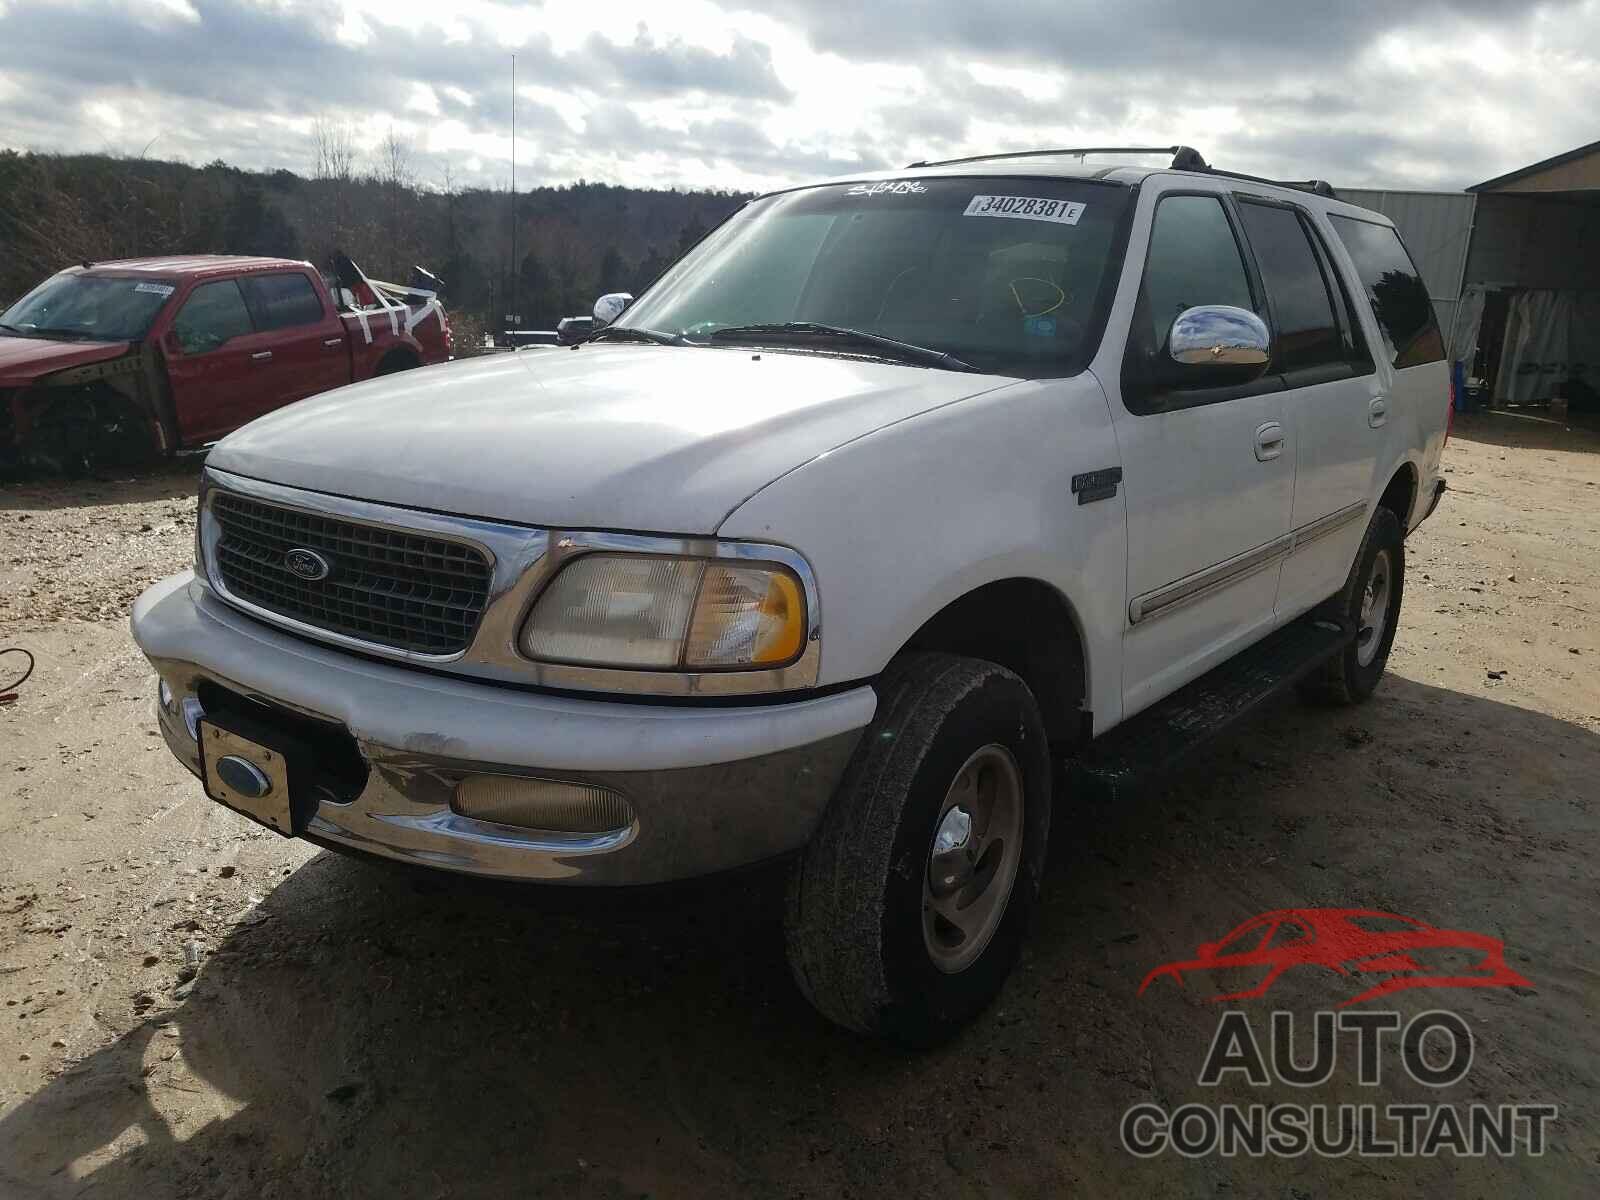 FORD EXPEDITION 1998 - ZACNJBBB0LPL91711